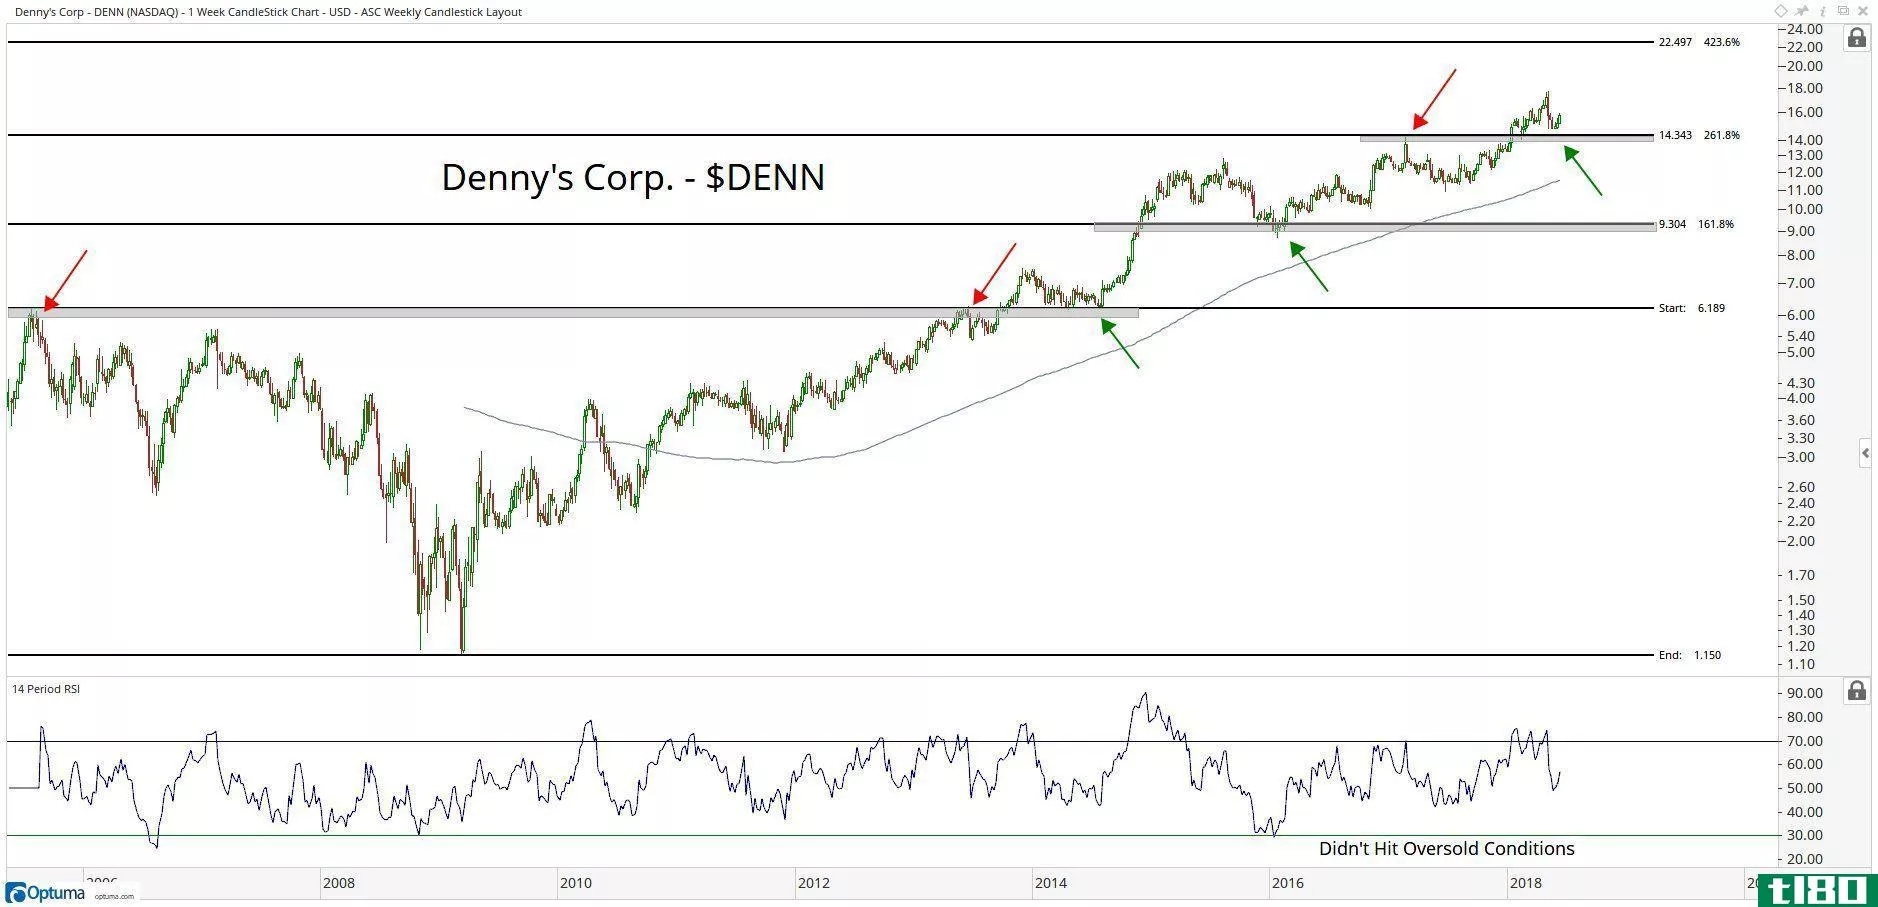 Technical chart showing the performance of Denny's Corporation (DENN) stock